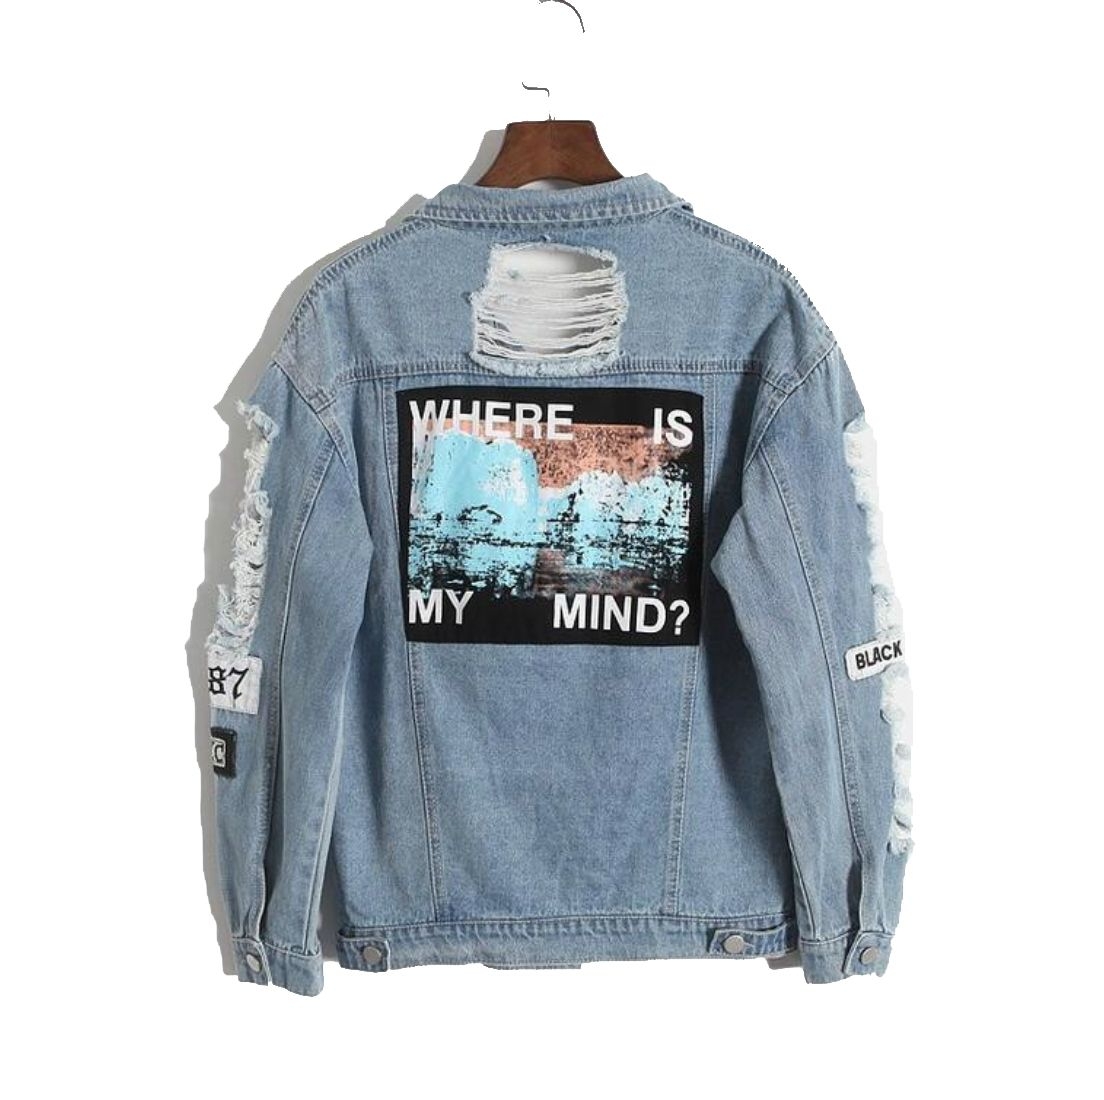 denim jacket with patches